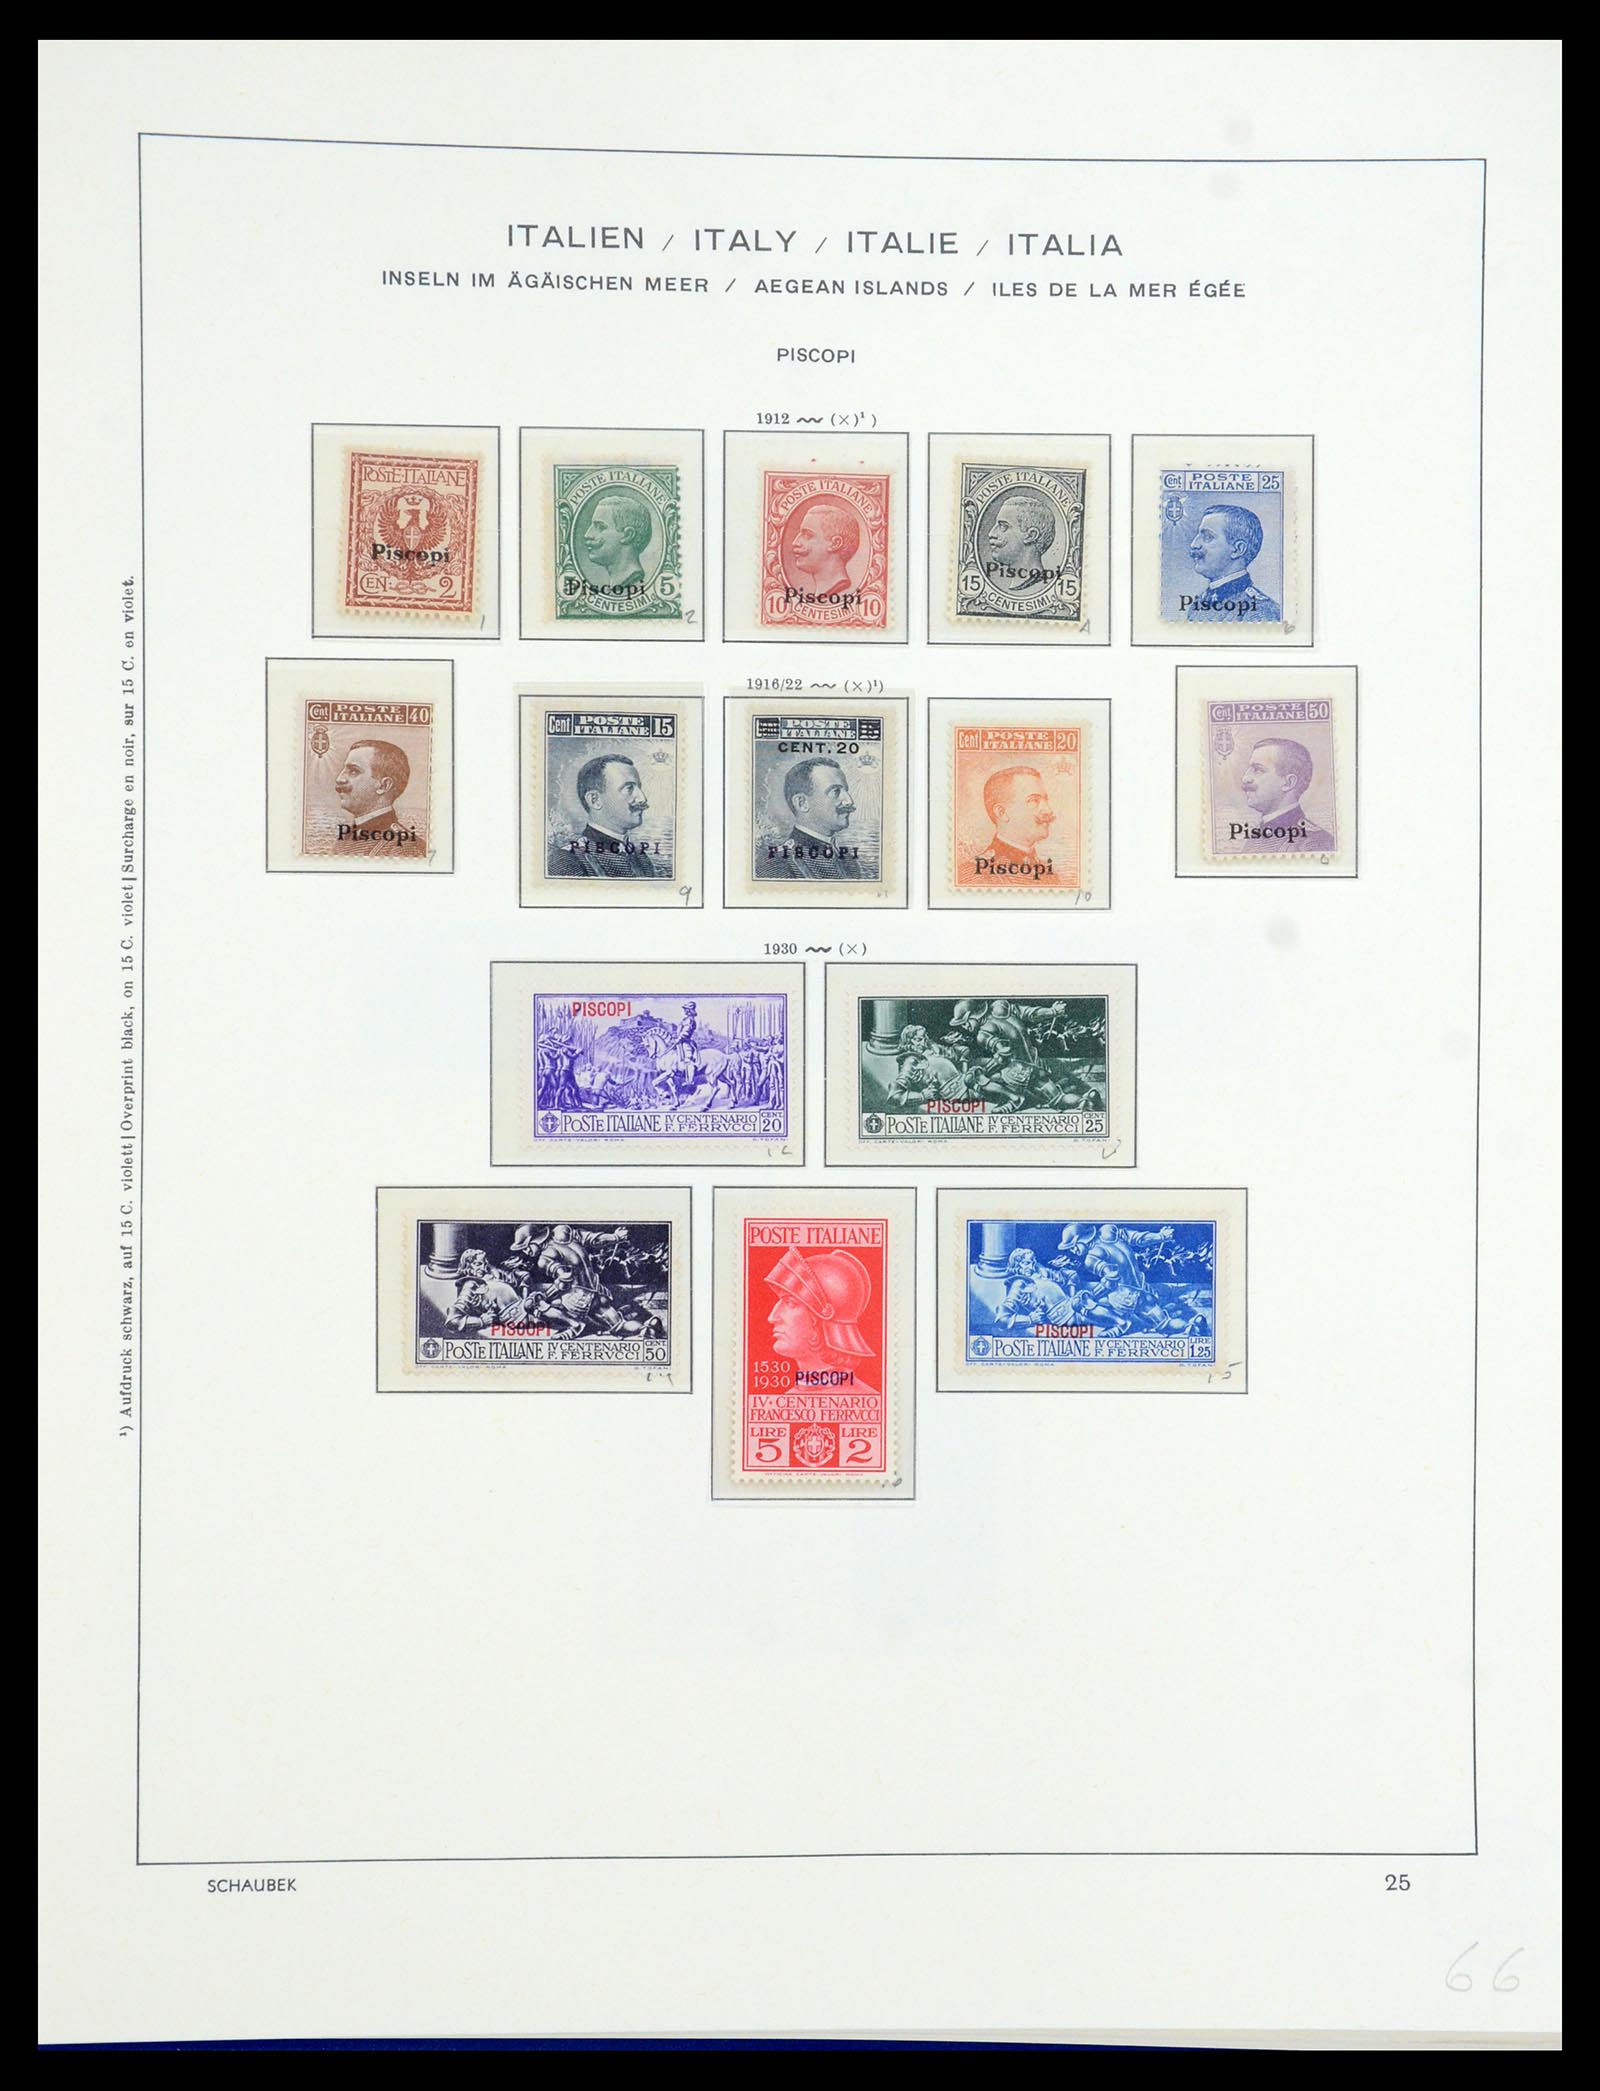 36181 031 - Stamp collection 36181 Italian Aegean Islands 1912-1941.